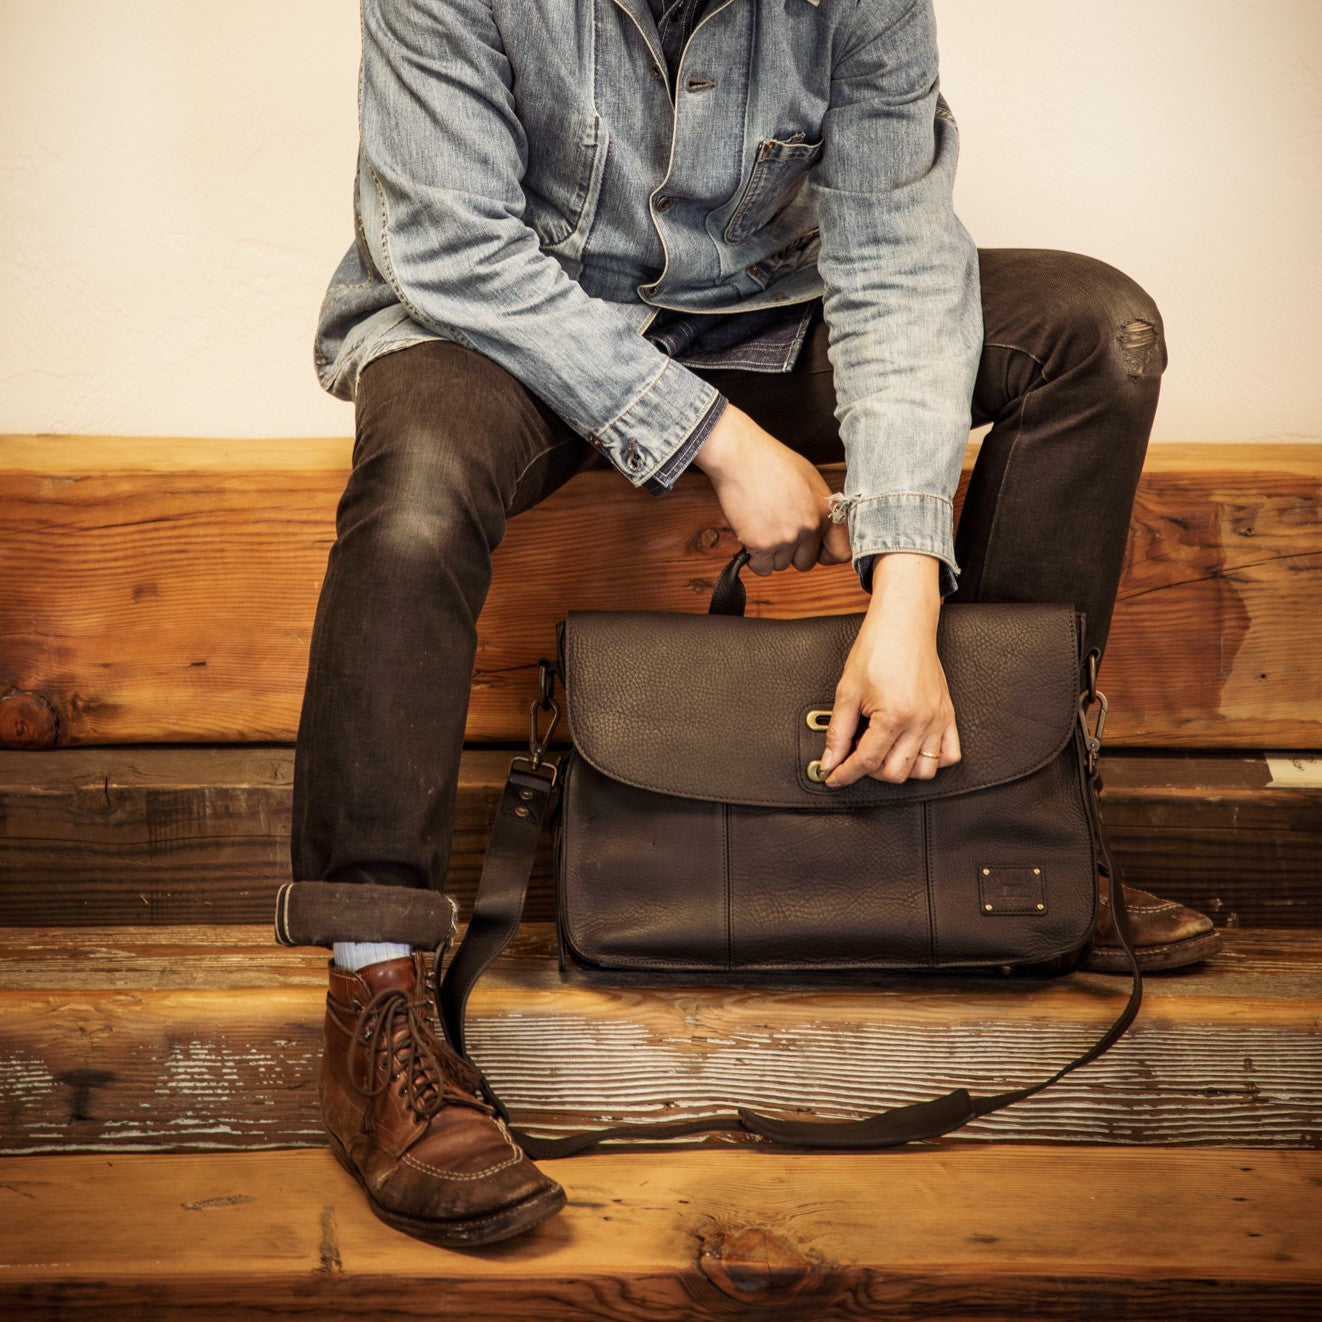 Kent Leather Messenger Bag in Black by Will Leather Goods